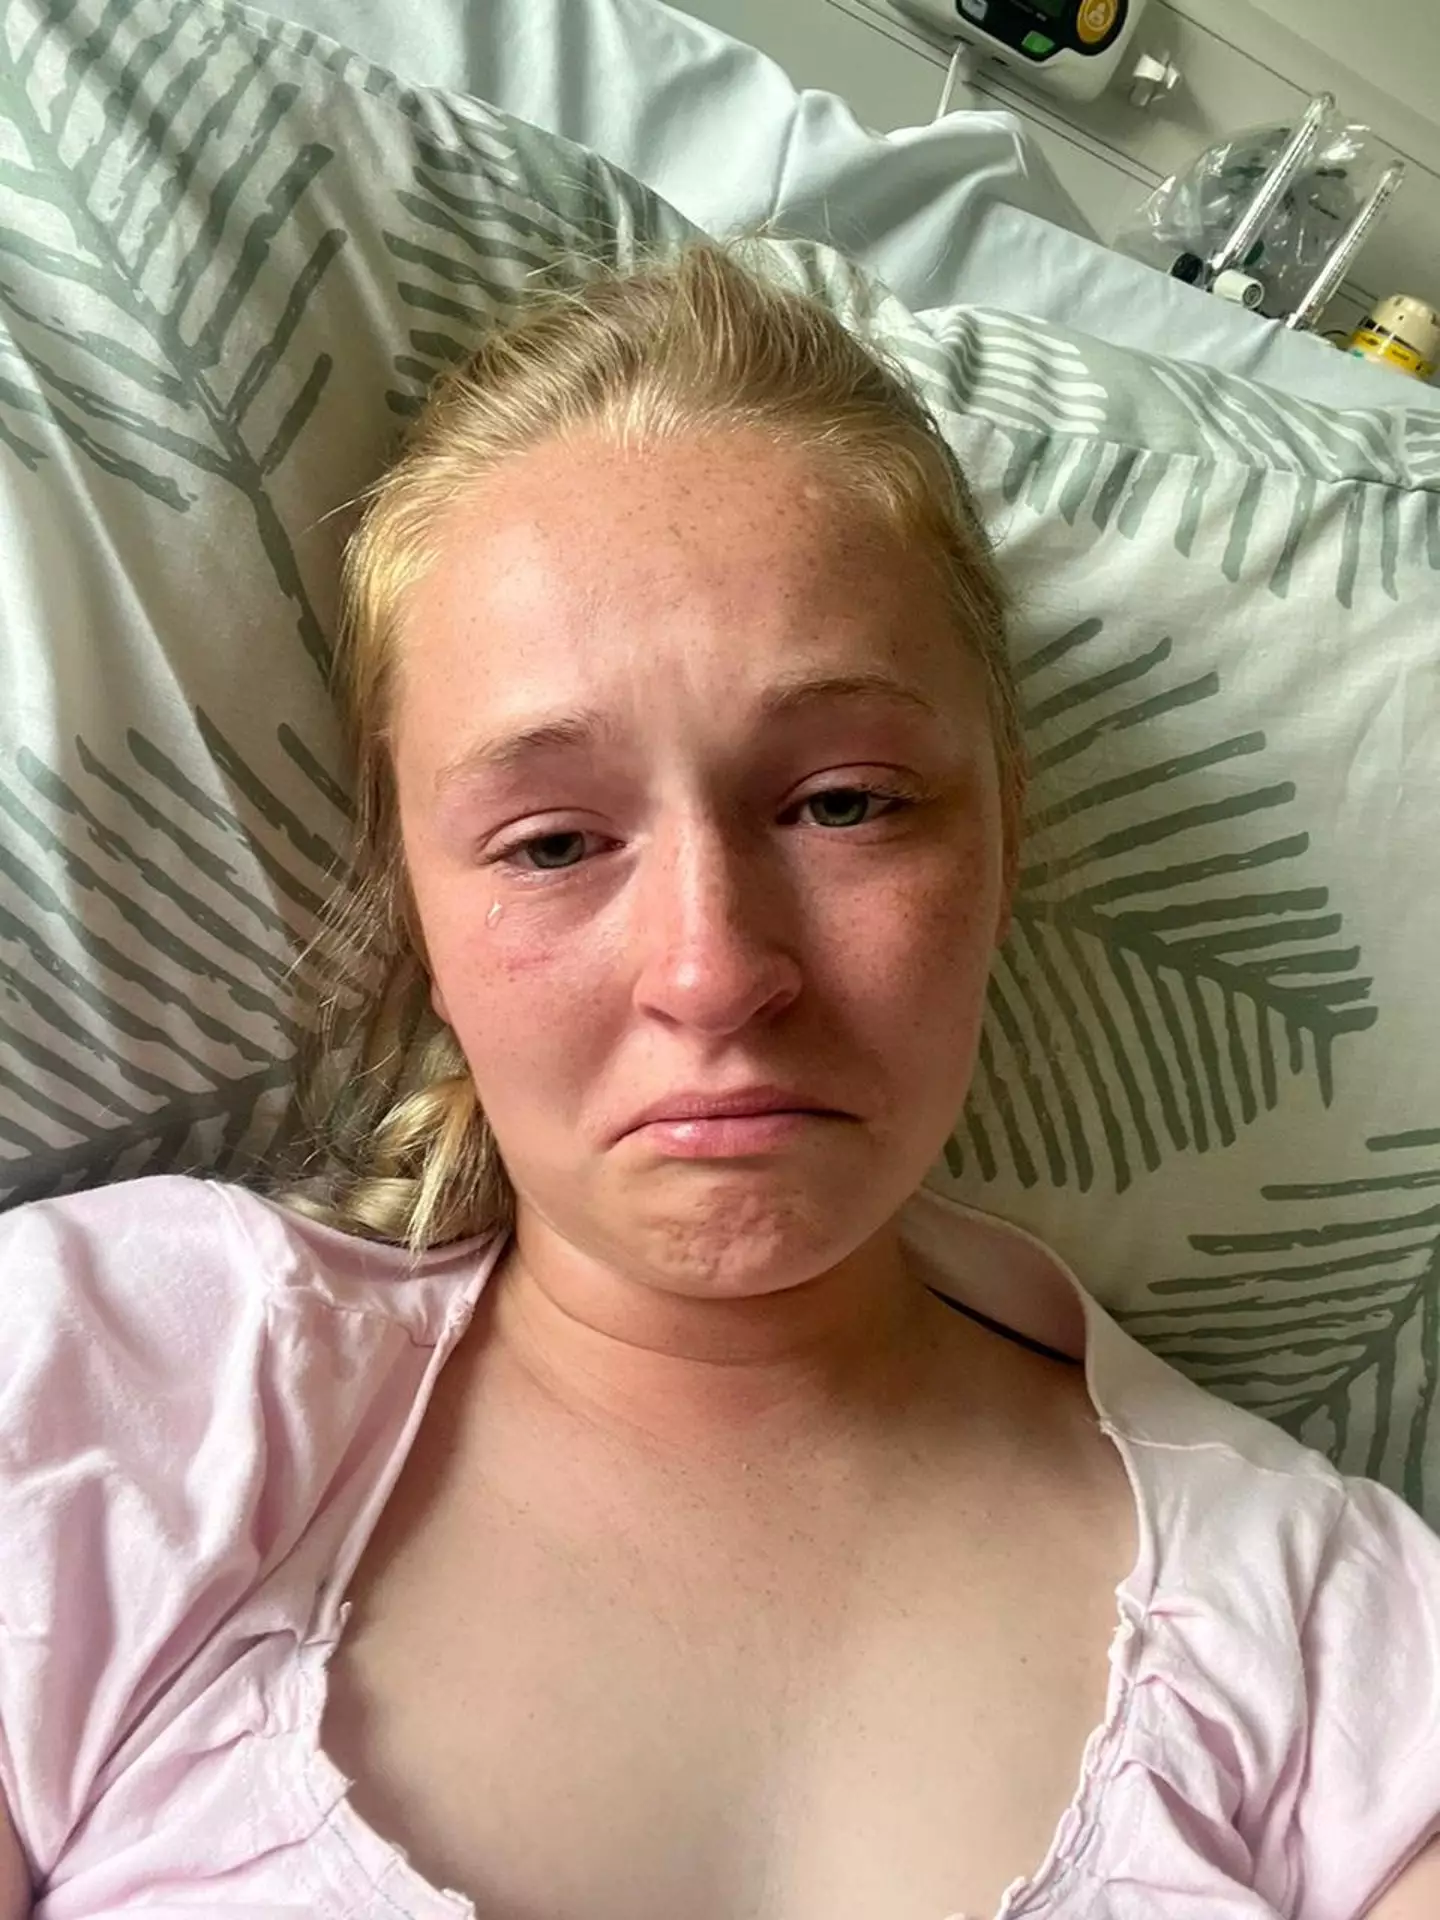 The 24-year-old ‘cried and screamed’ when she was given her diagnosis.